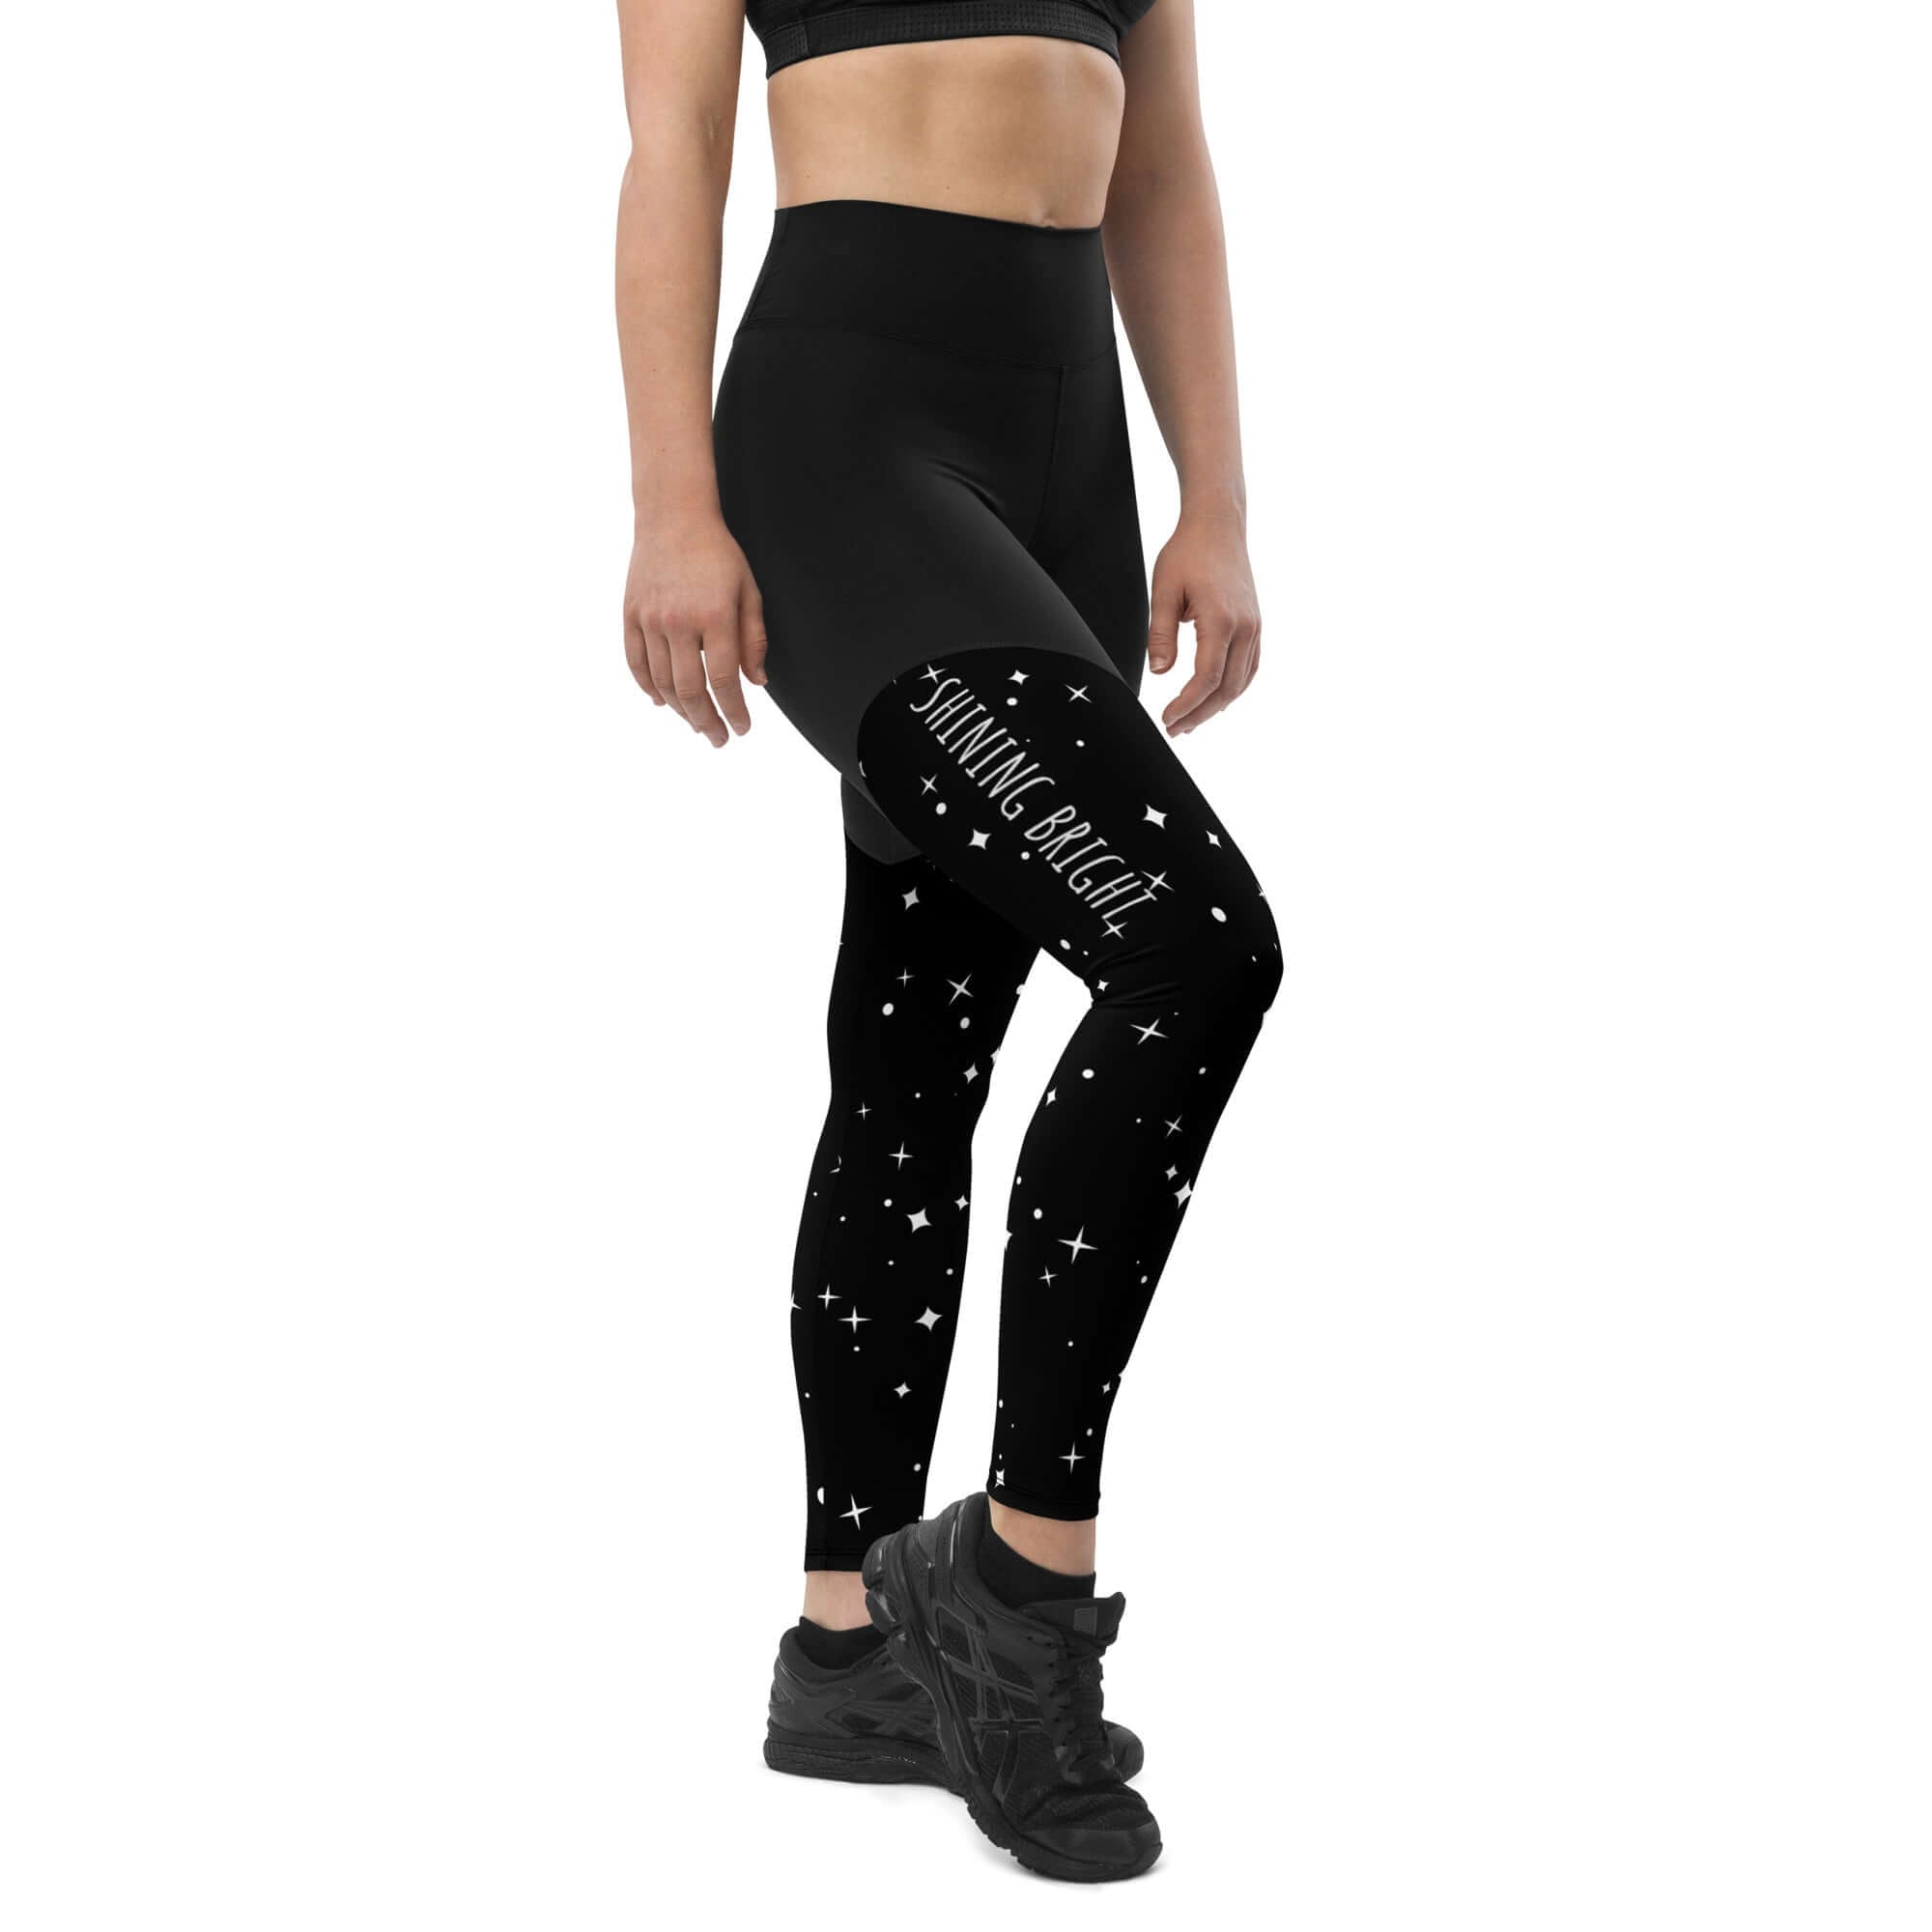 Black Sports Leggings with Handy Pockets - Revive Wear     undefined